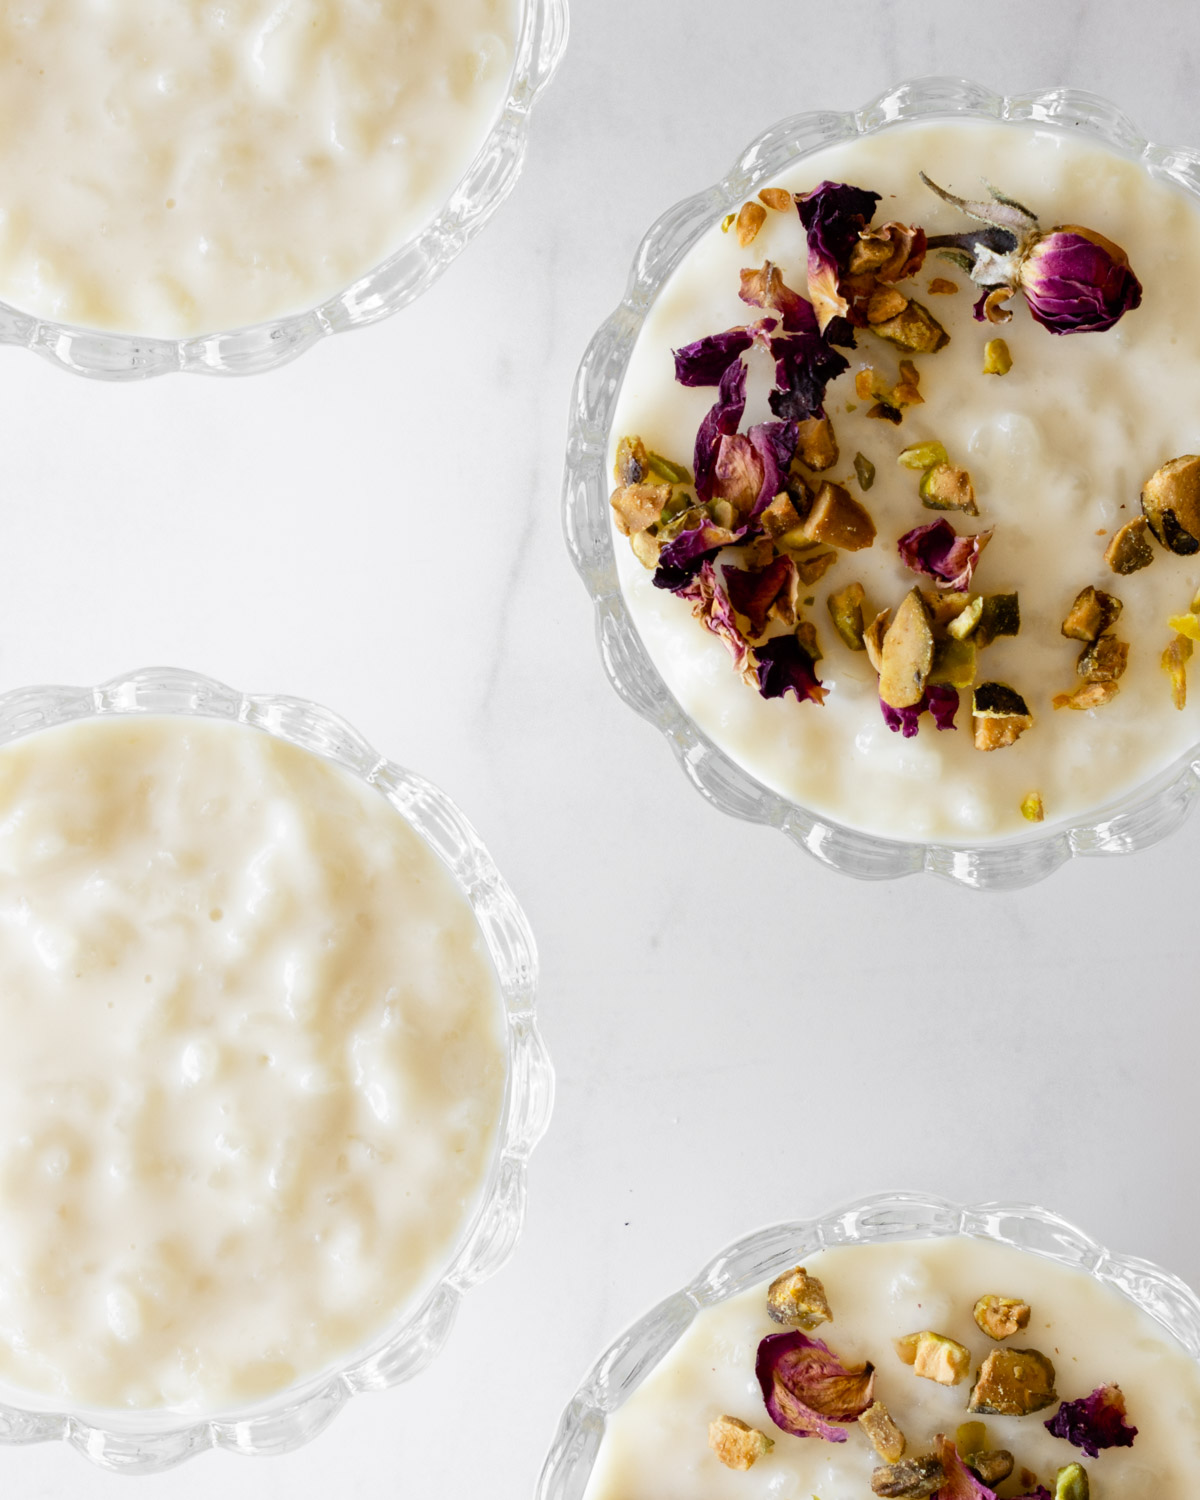 four small glass dishes with lebanese rice pudding and its garnishes.